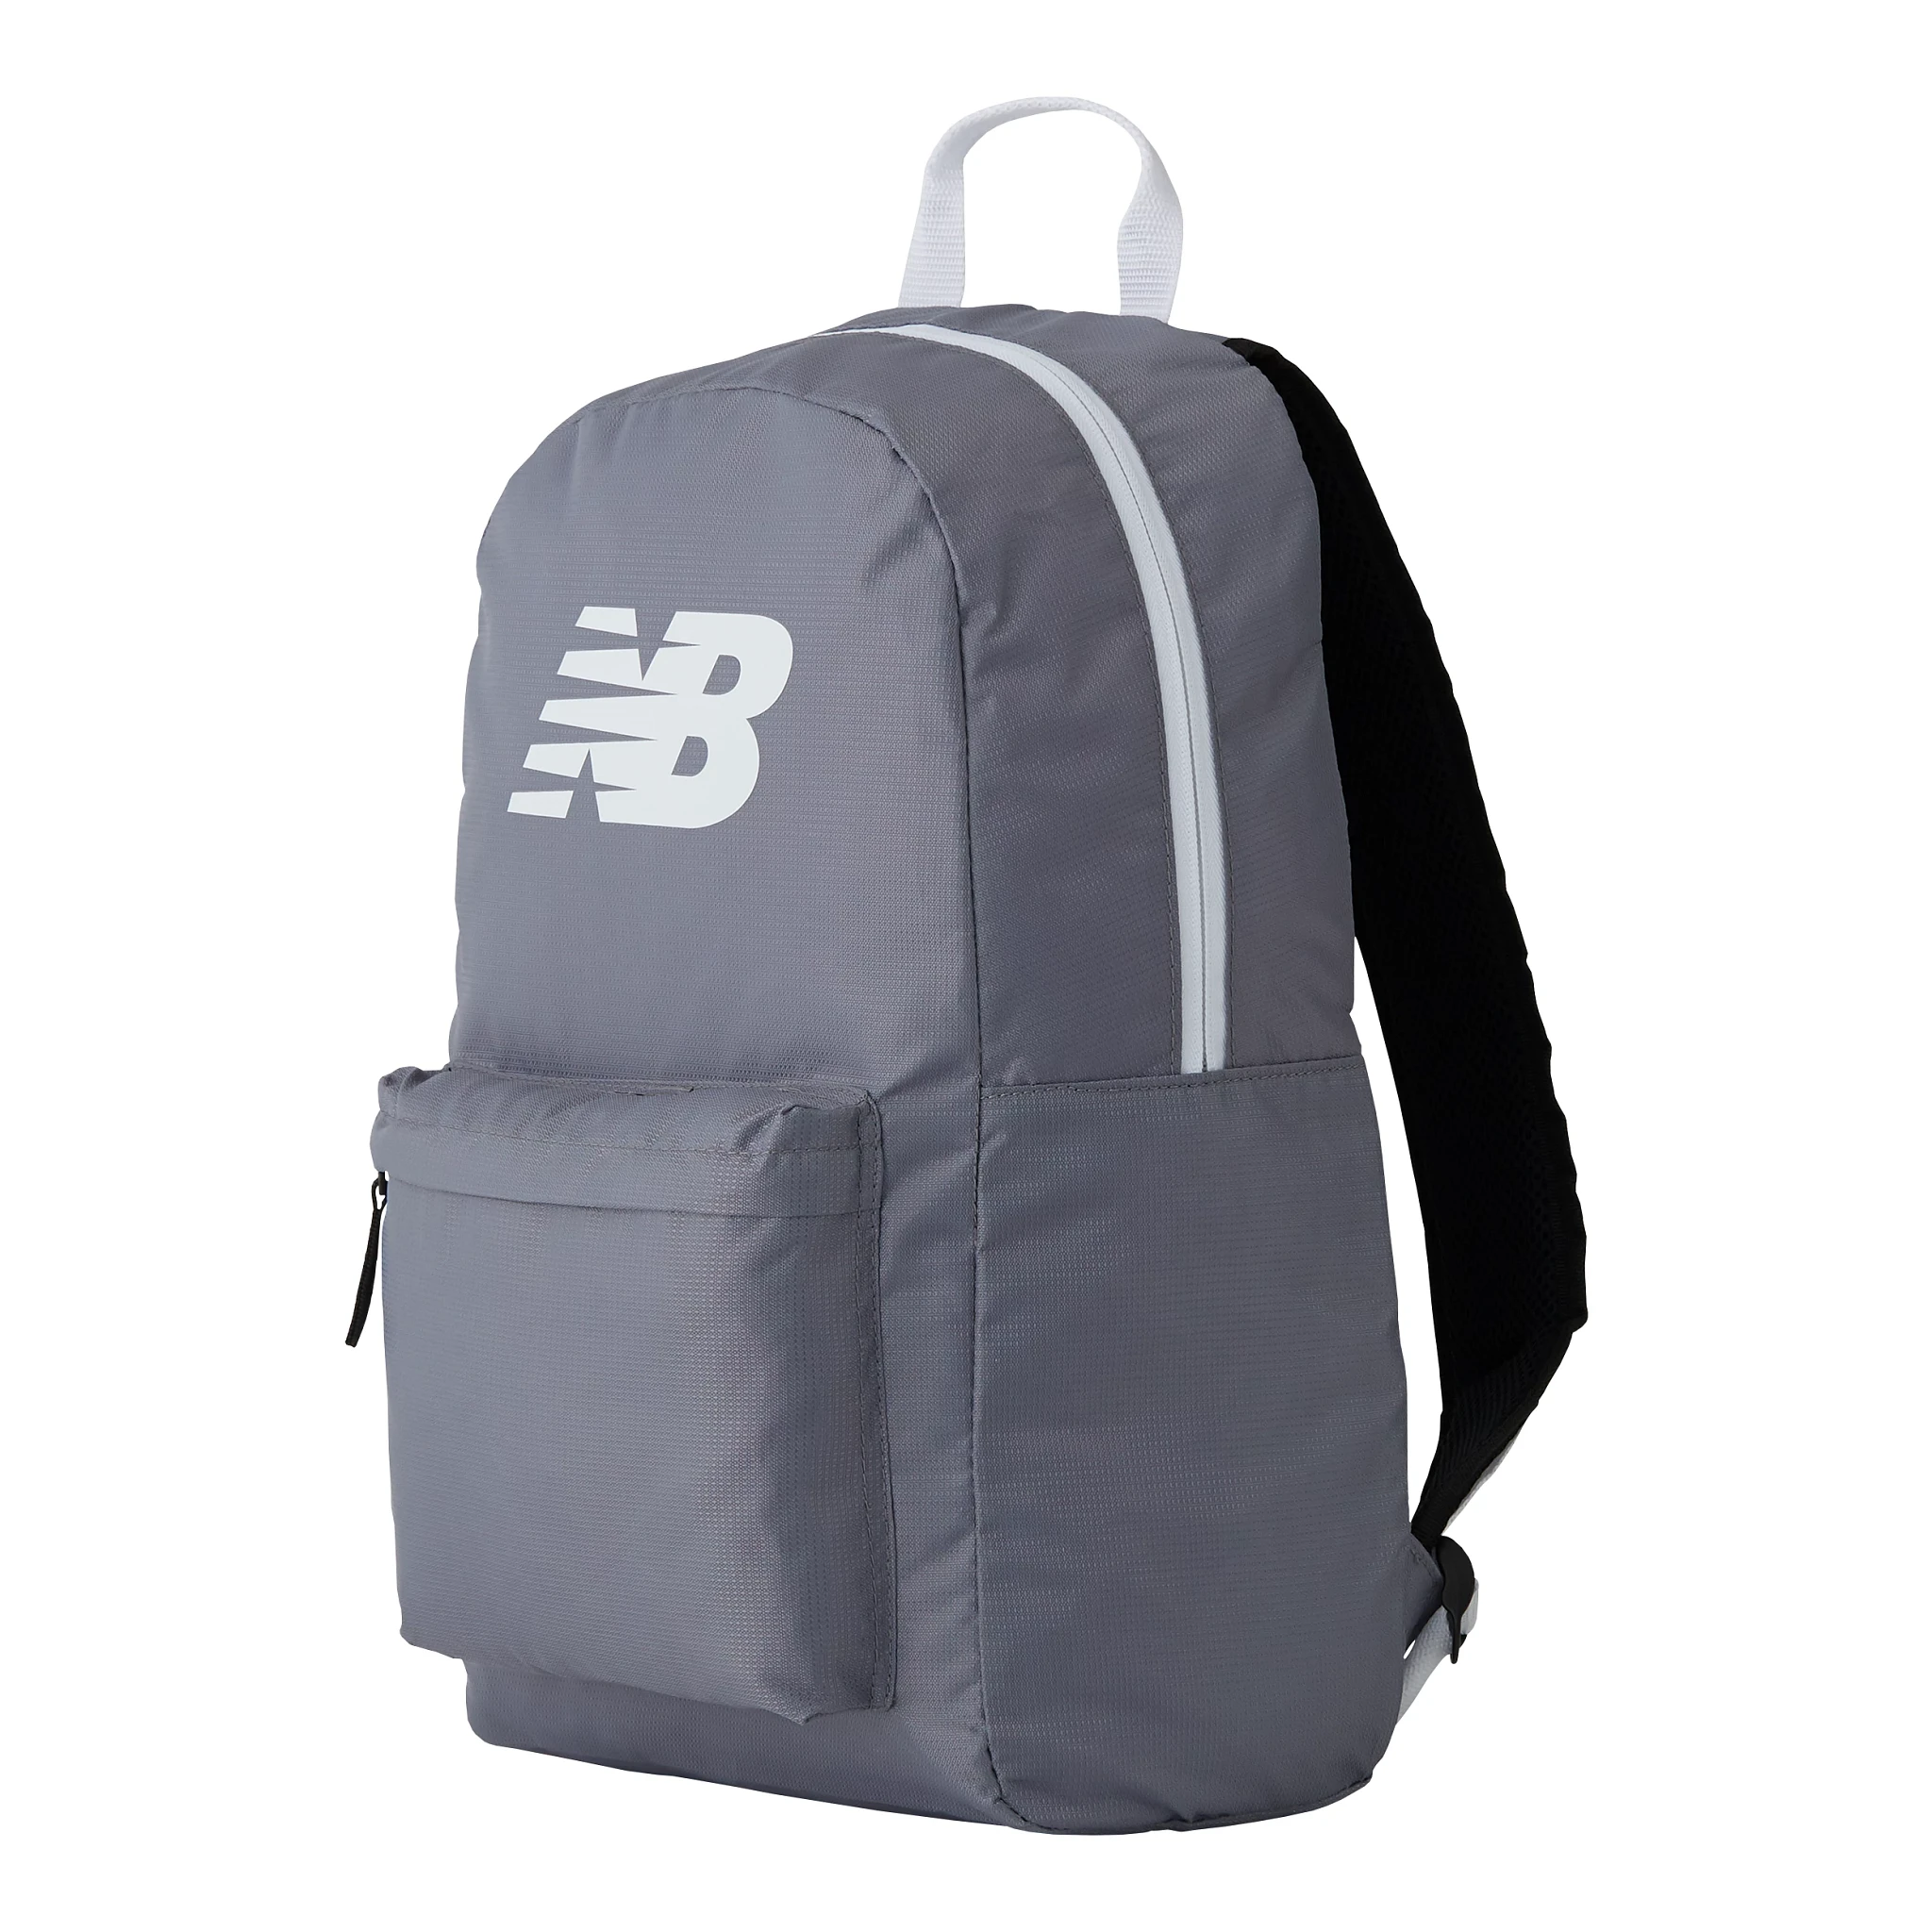 New Balance Opp Core Backpack GM4 LAB11101